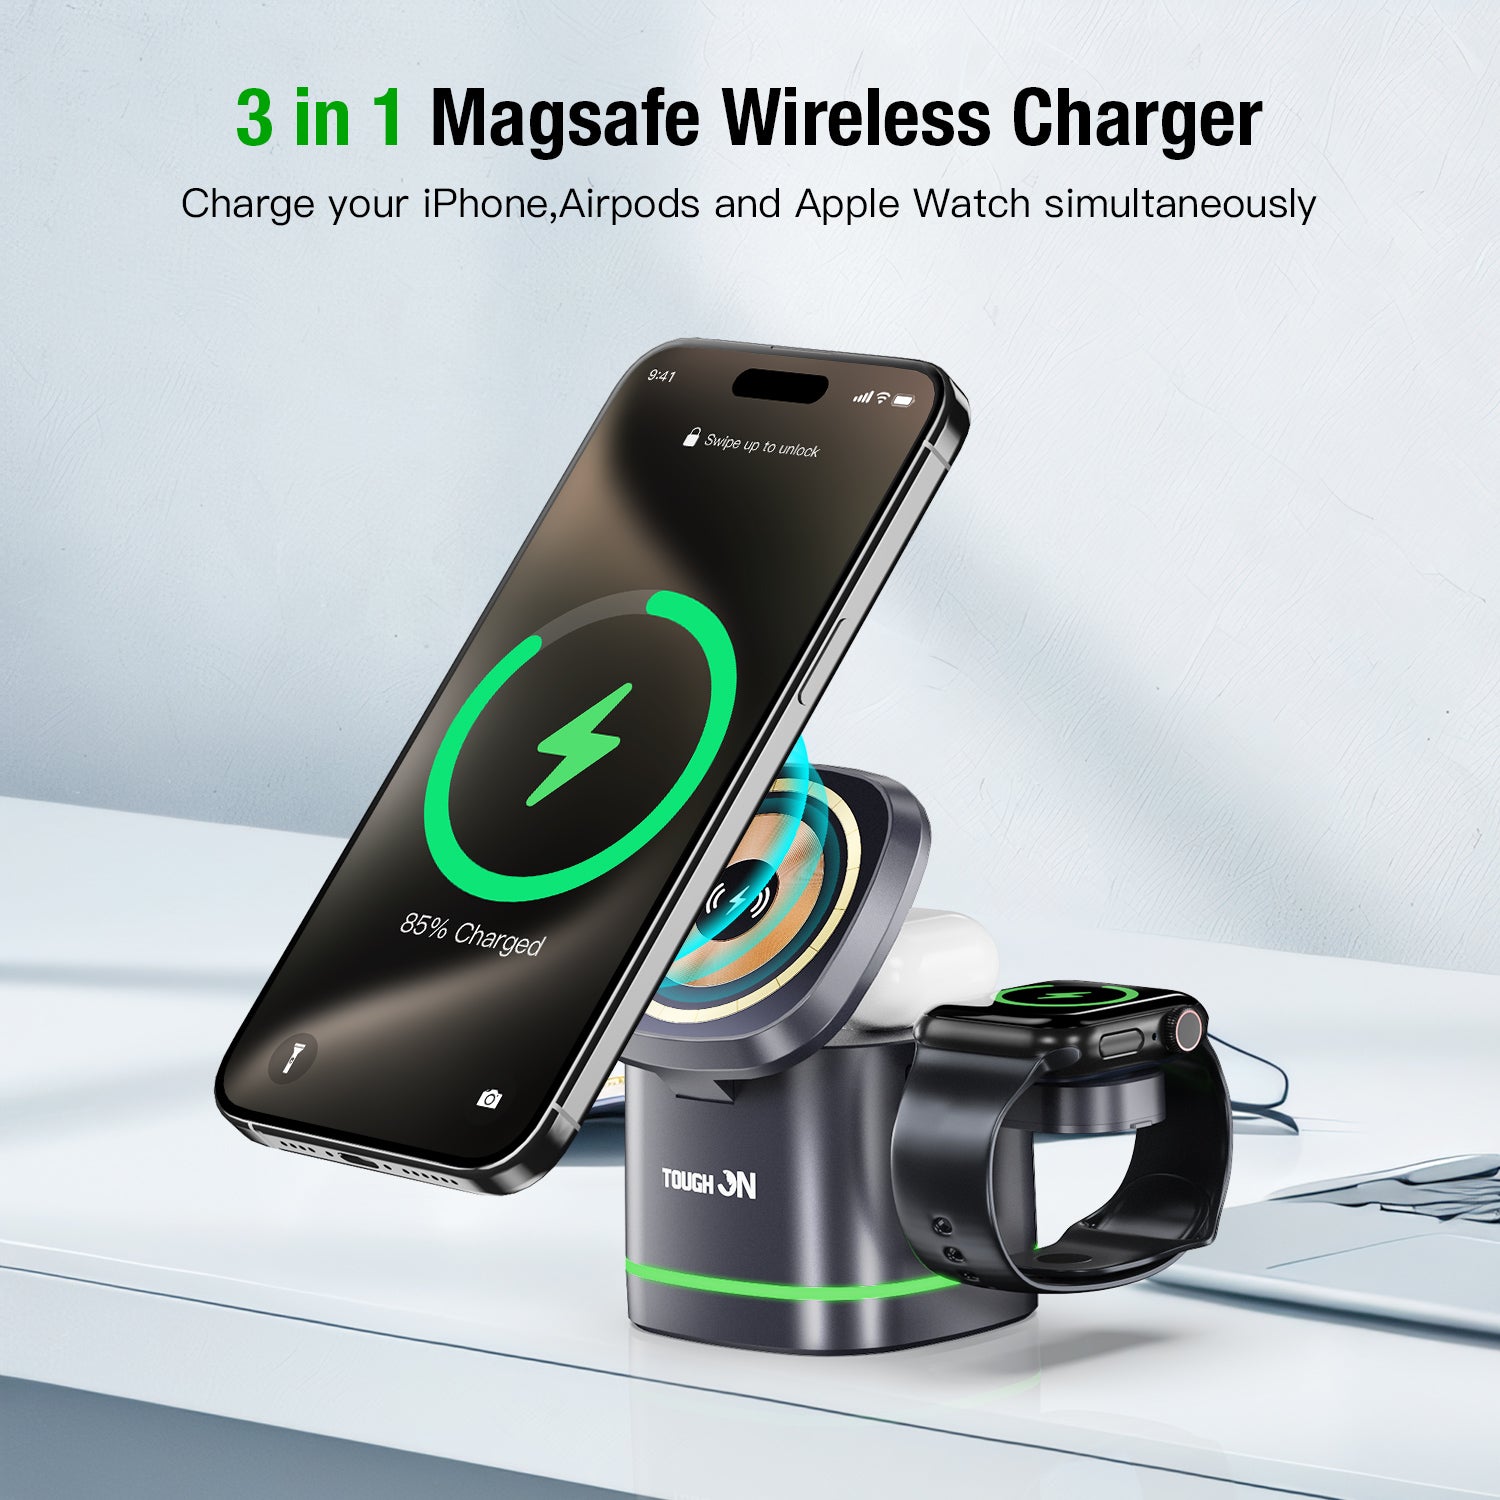 Tough On 3 in 1 Wireless Charger Cube with Magsafe Charger Stand